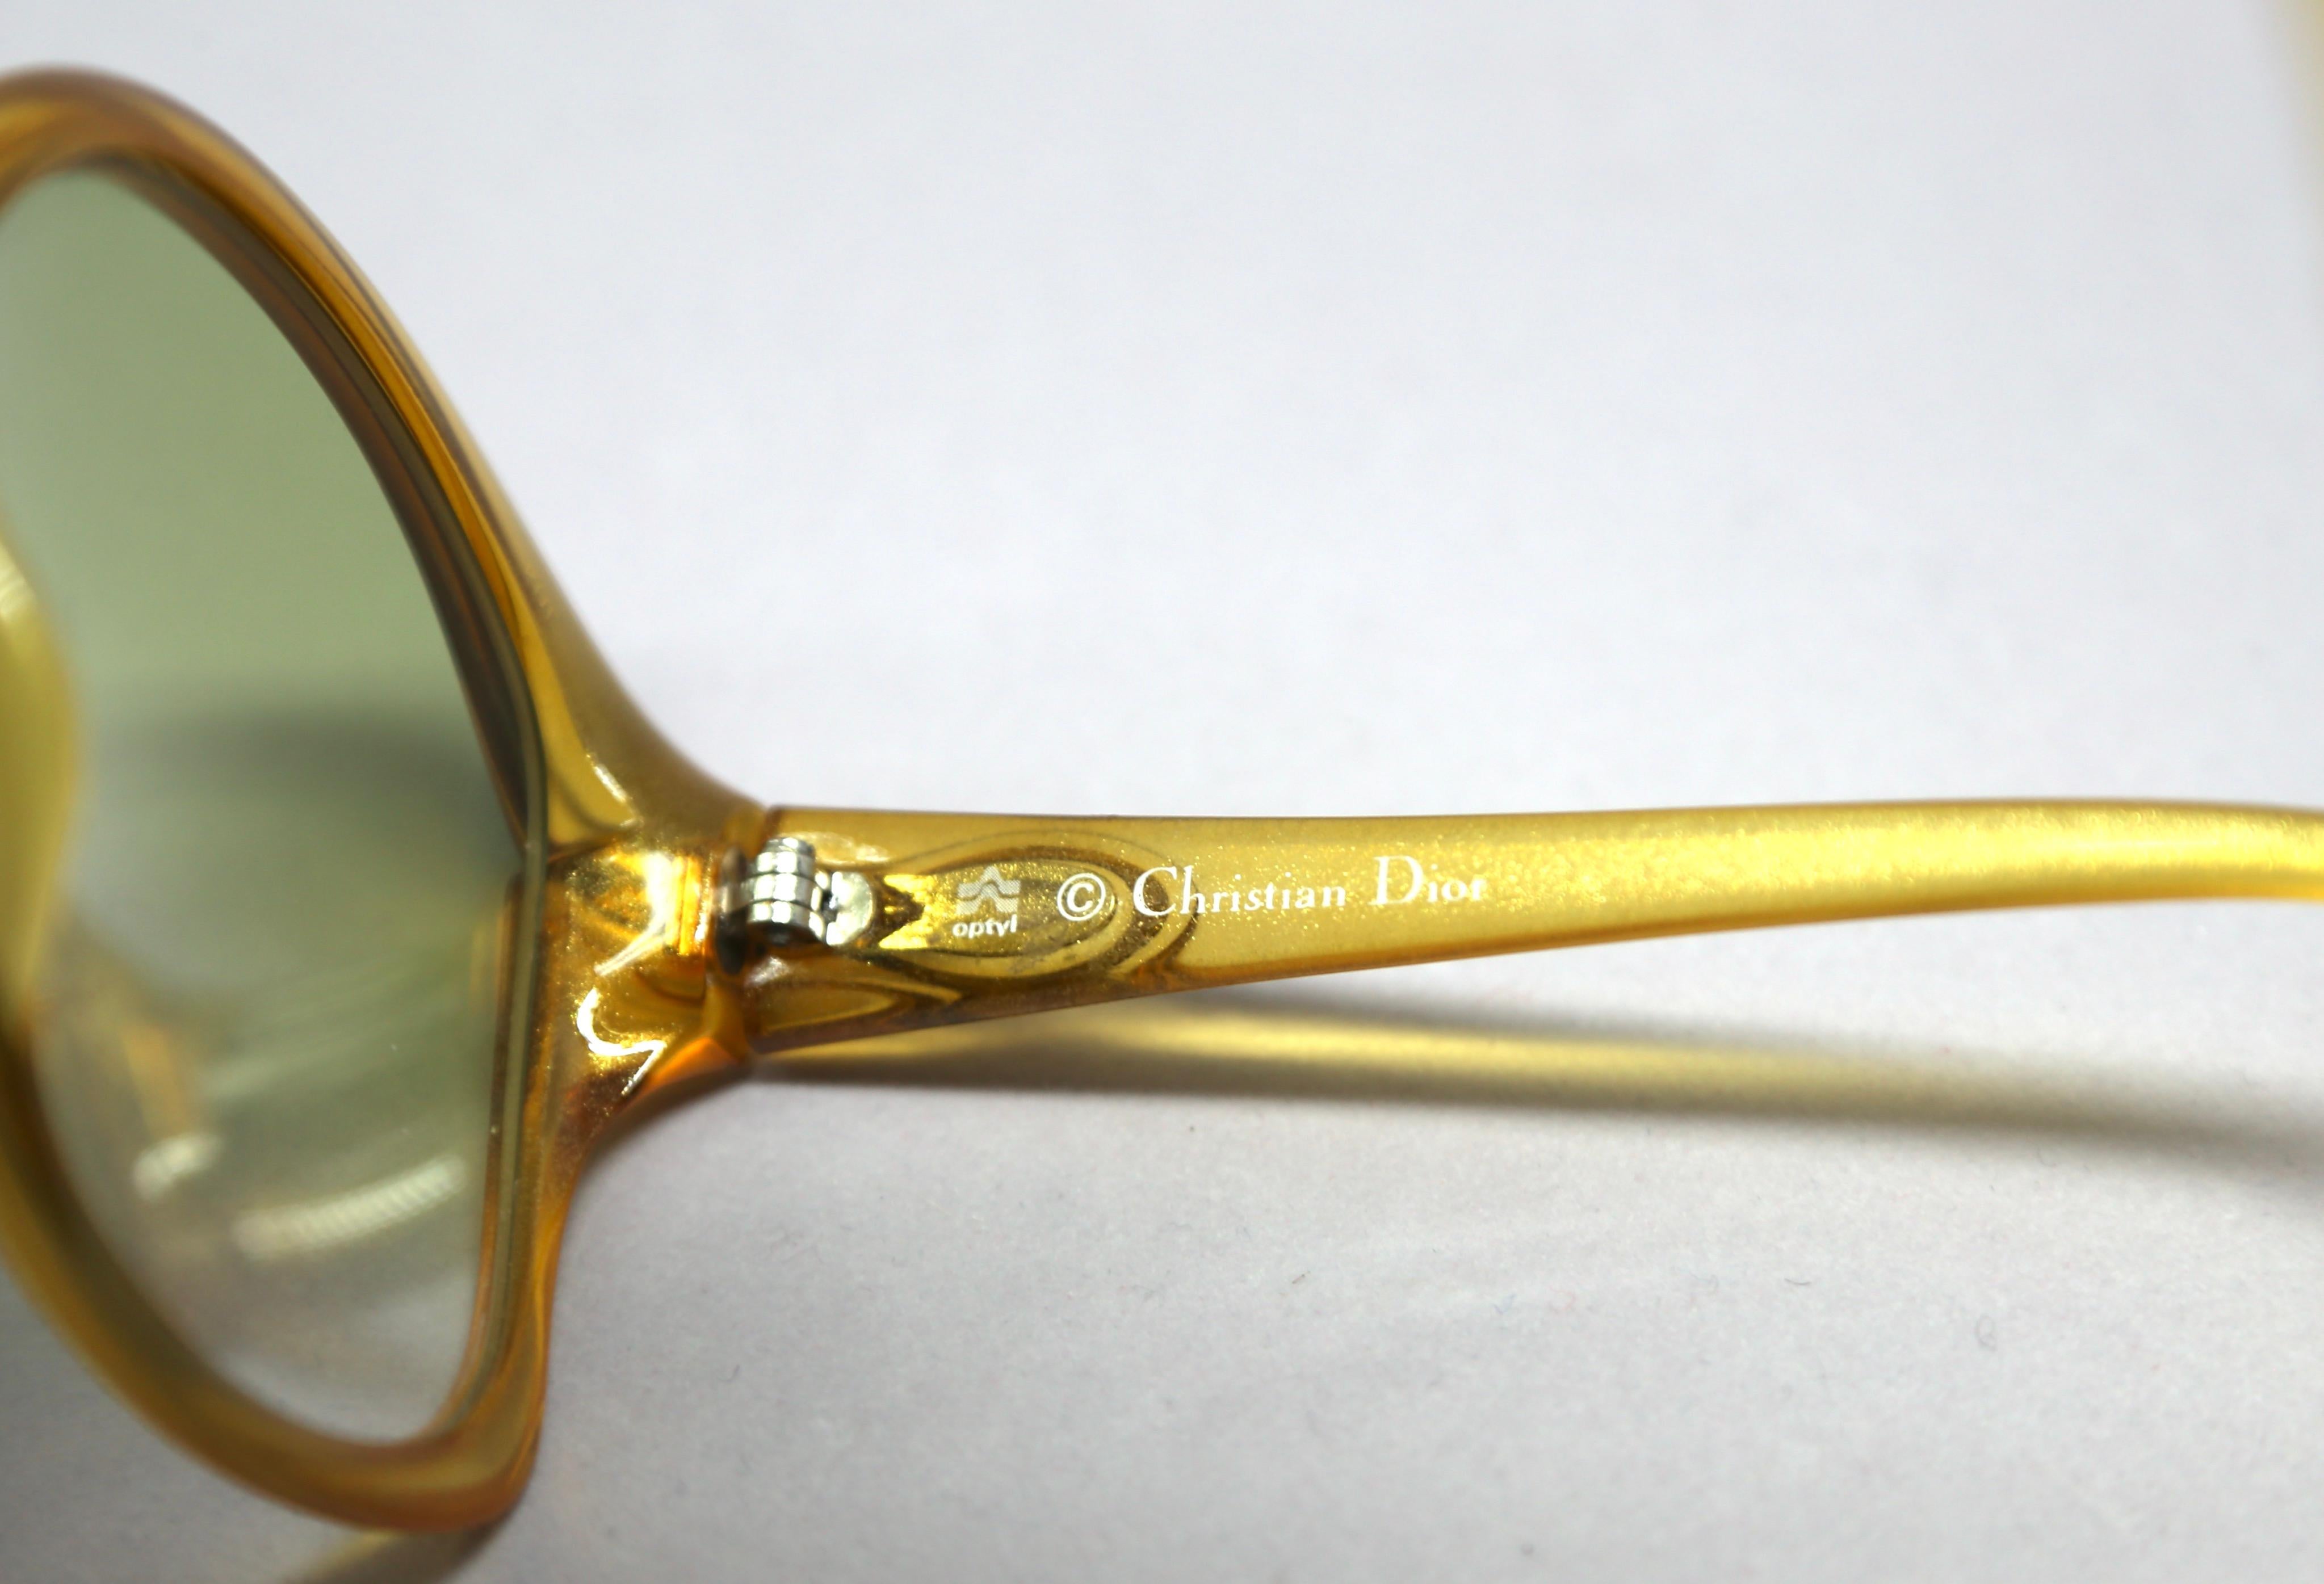 NEW 1970's CHRISTIAN DIOR sunglasses with gradient lenses 1